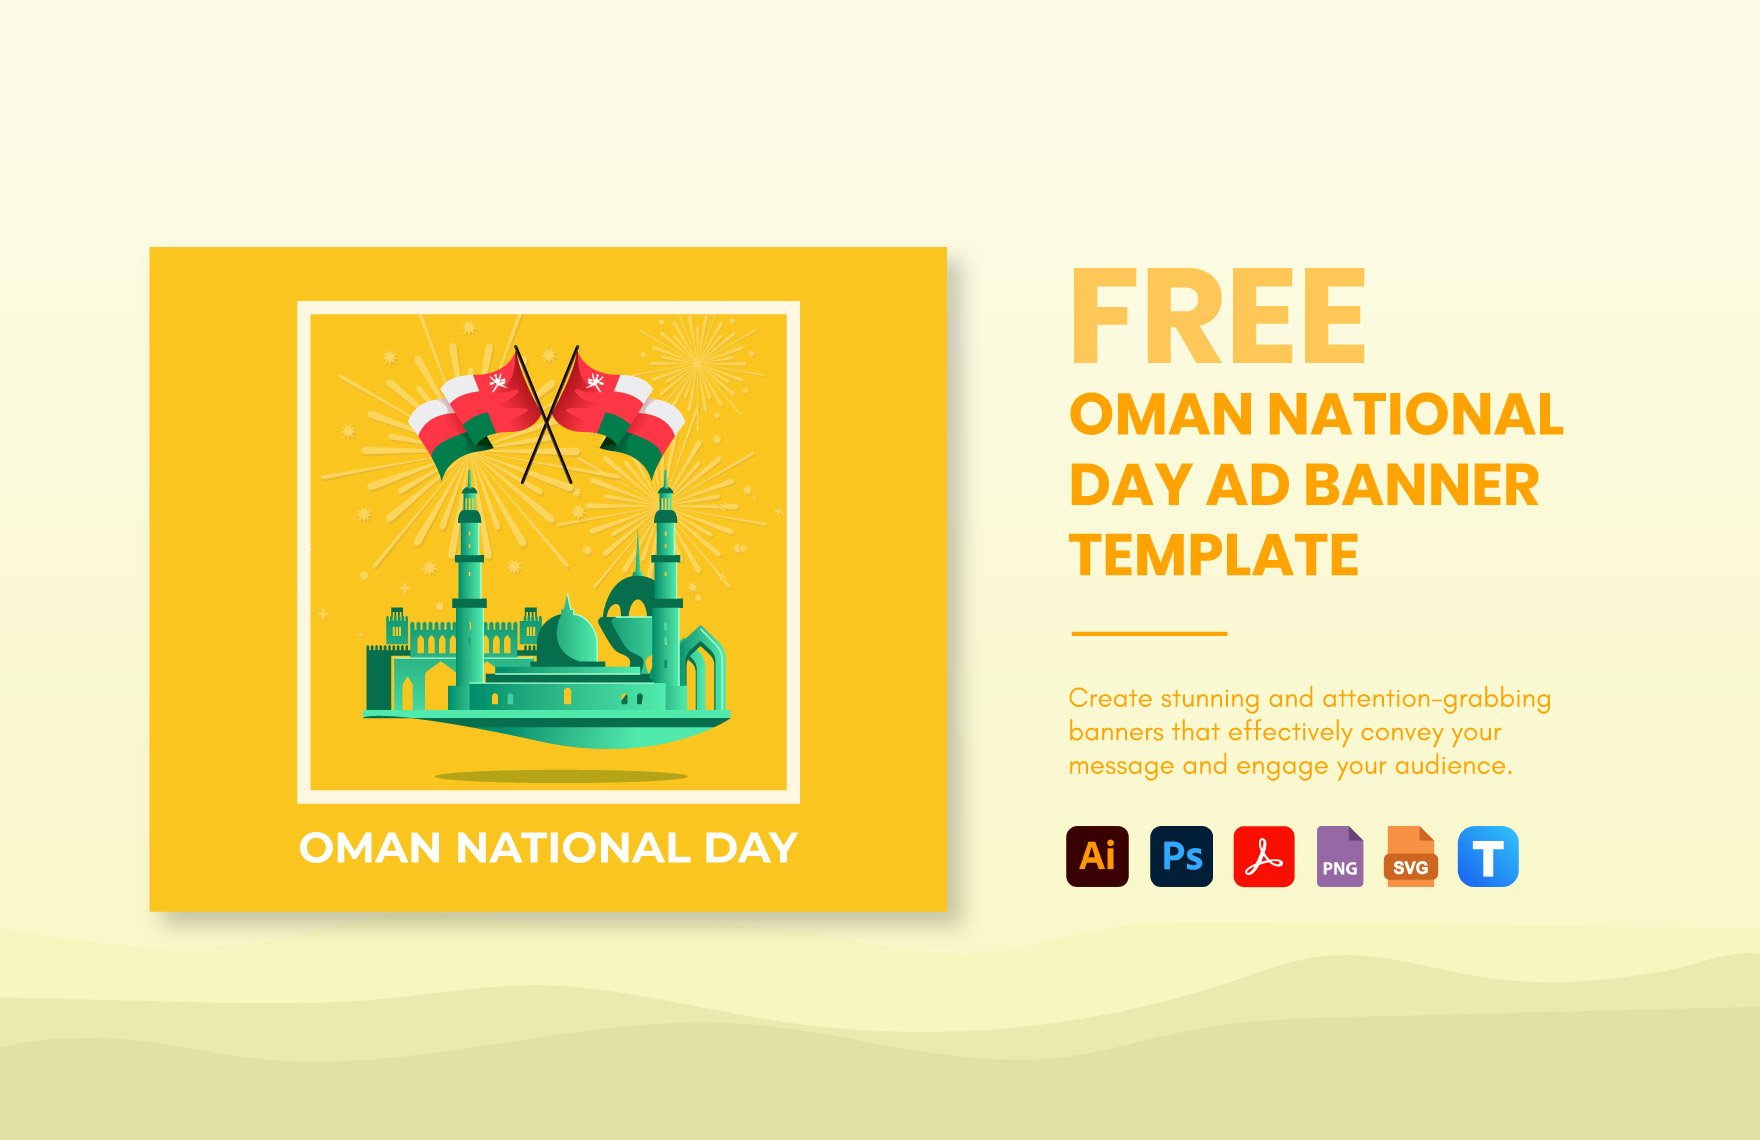 Oman National Day Ad Banner Template